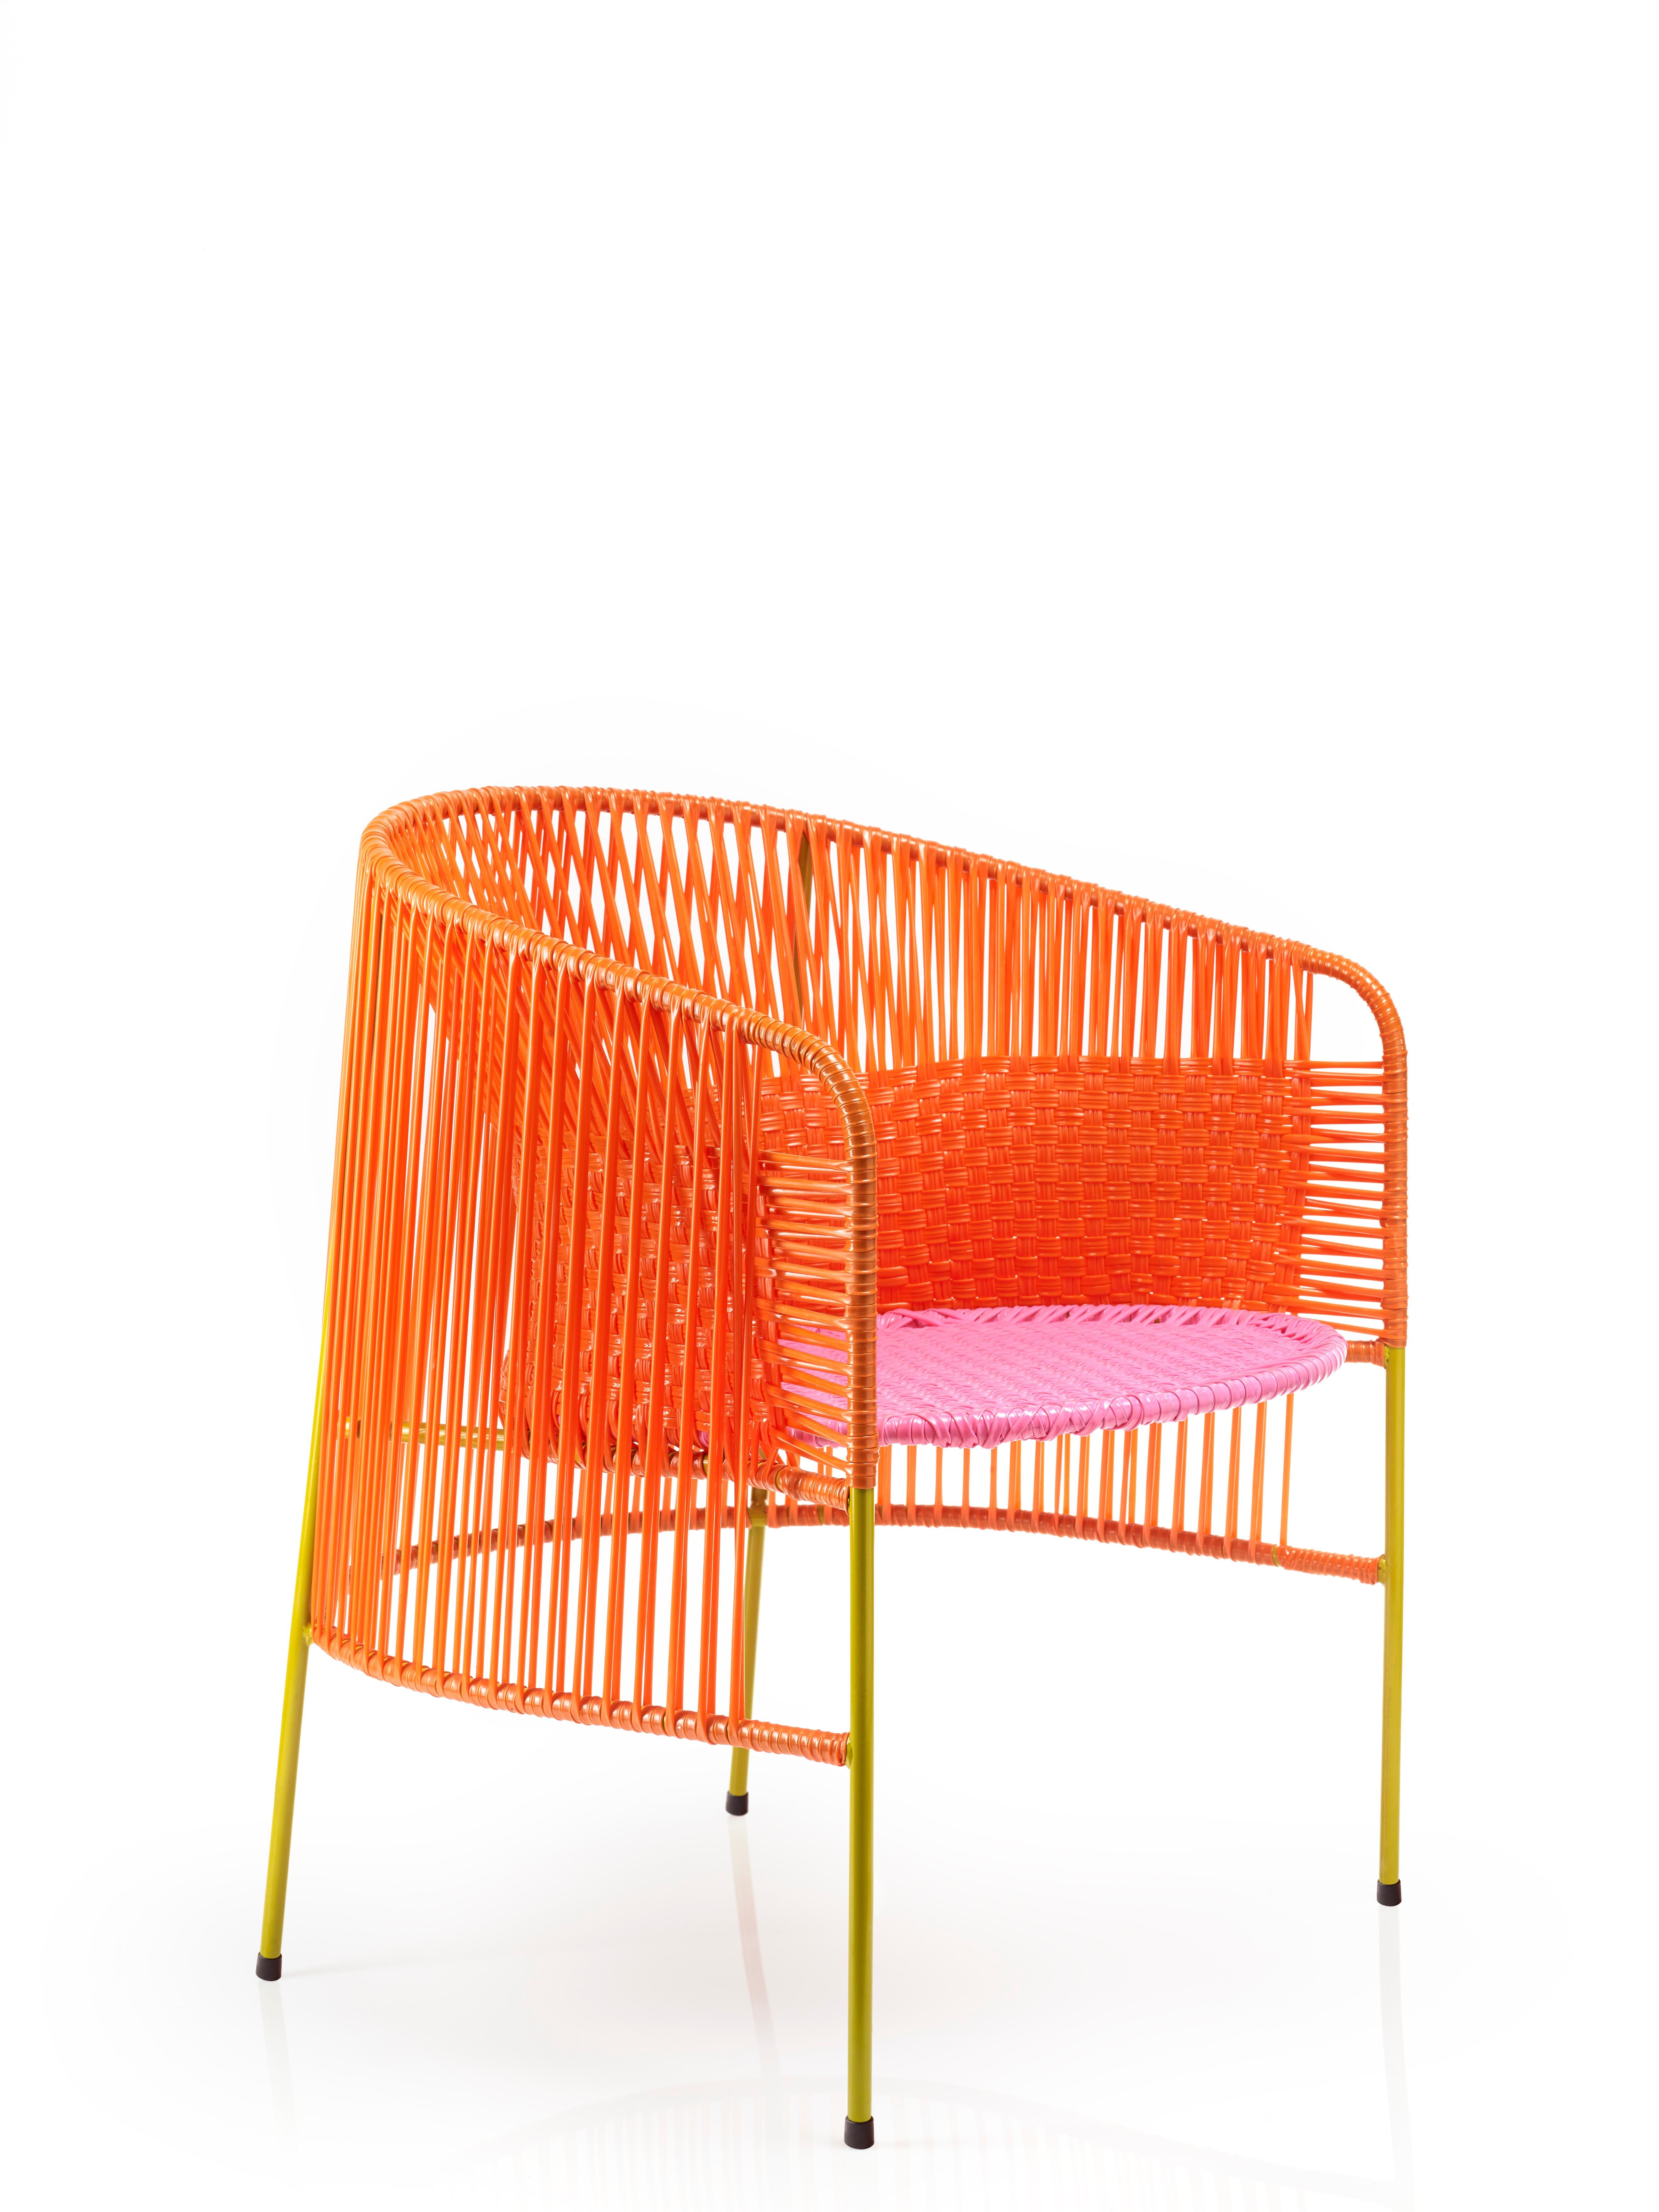 Set of 2 Orange Rose Caribe lounge chair by Sebastian Herkner
Materials: Galvanized and powder-coated tubular steel. PVC strings are made from recycled plastic.
Technique: Made from recycled plastic and weaved by local craftspeople in Colombia.